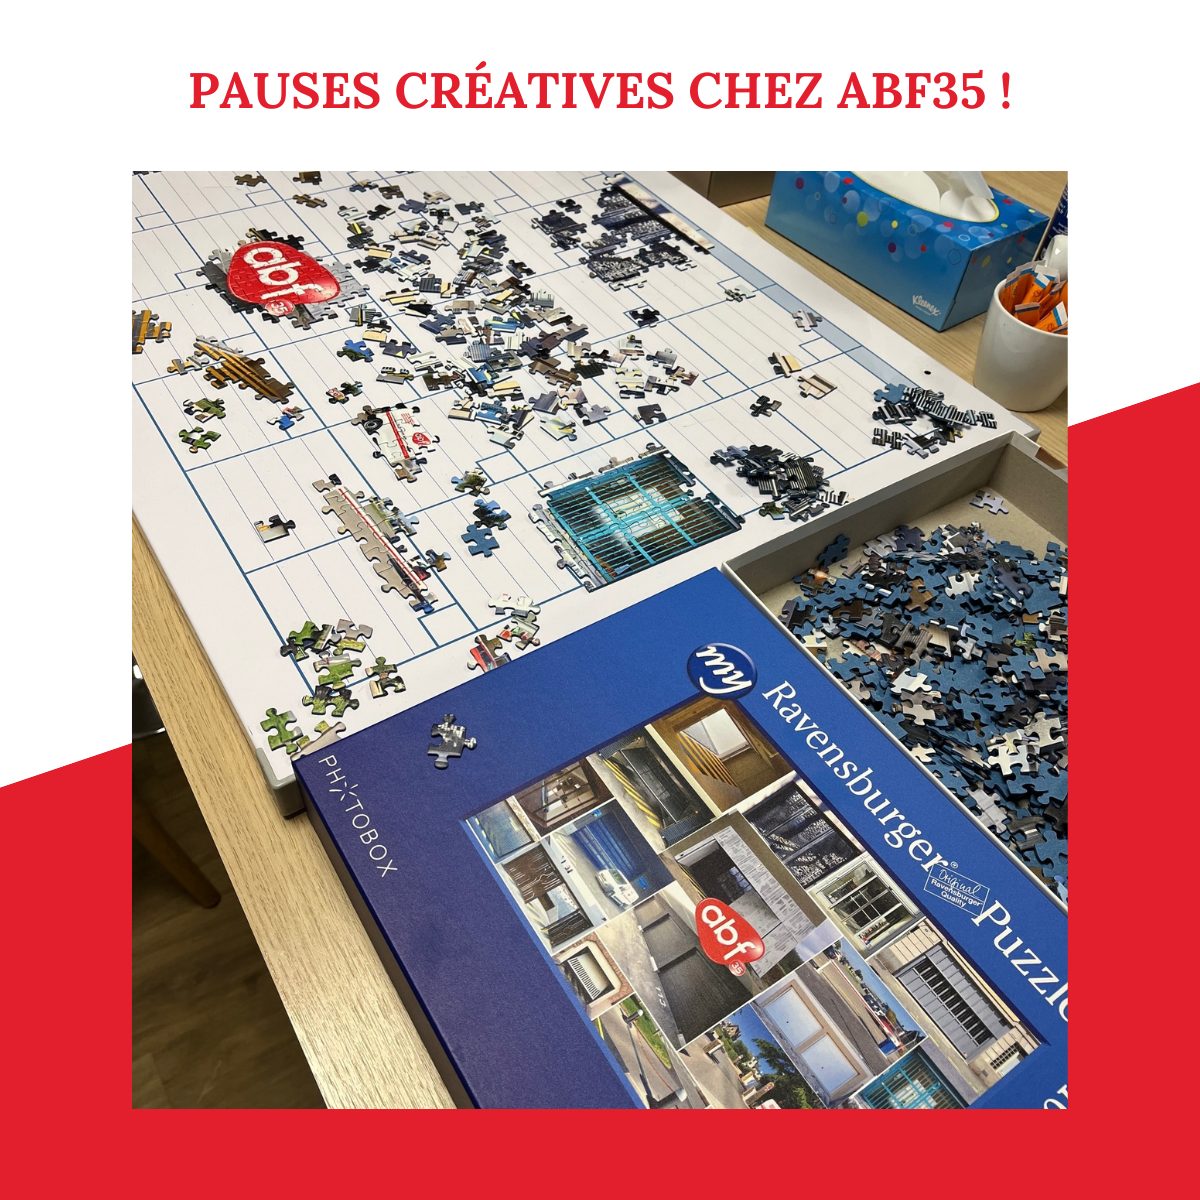 You are currently viewing PAUSE CREATIVE CHEZ ABF35 !